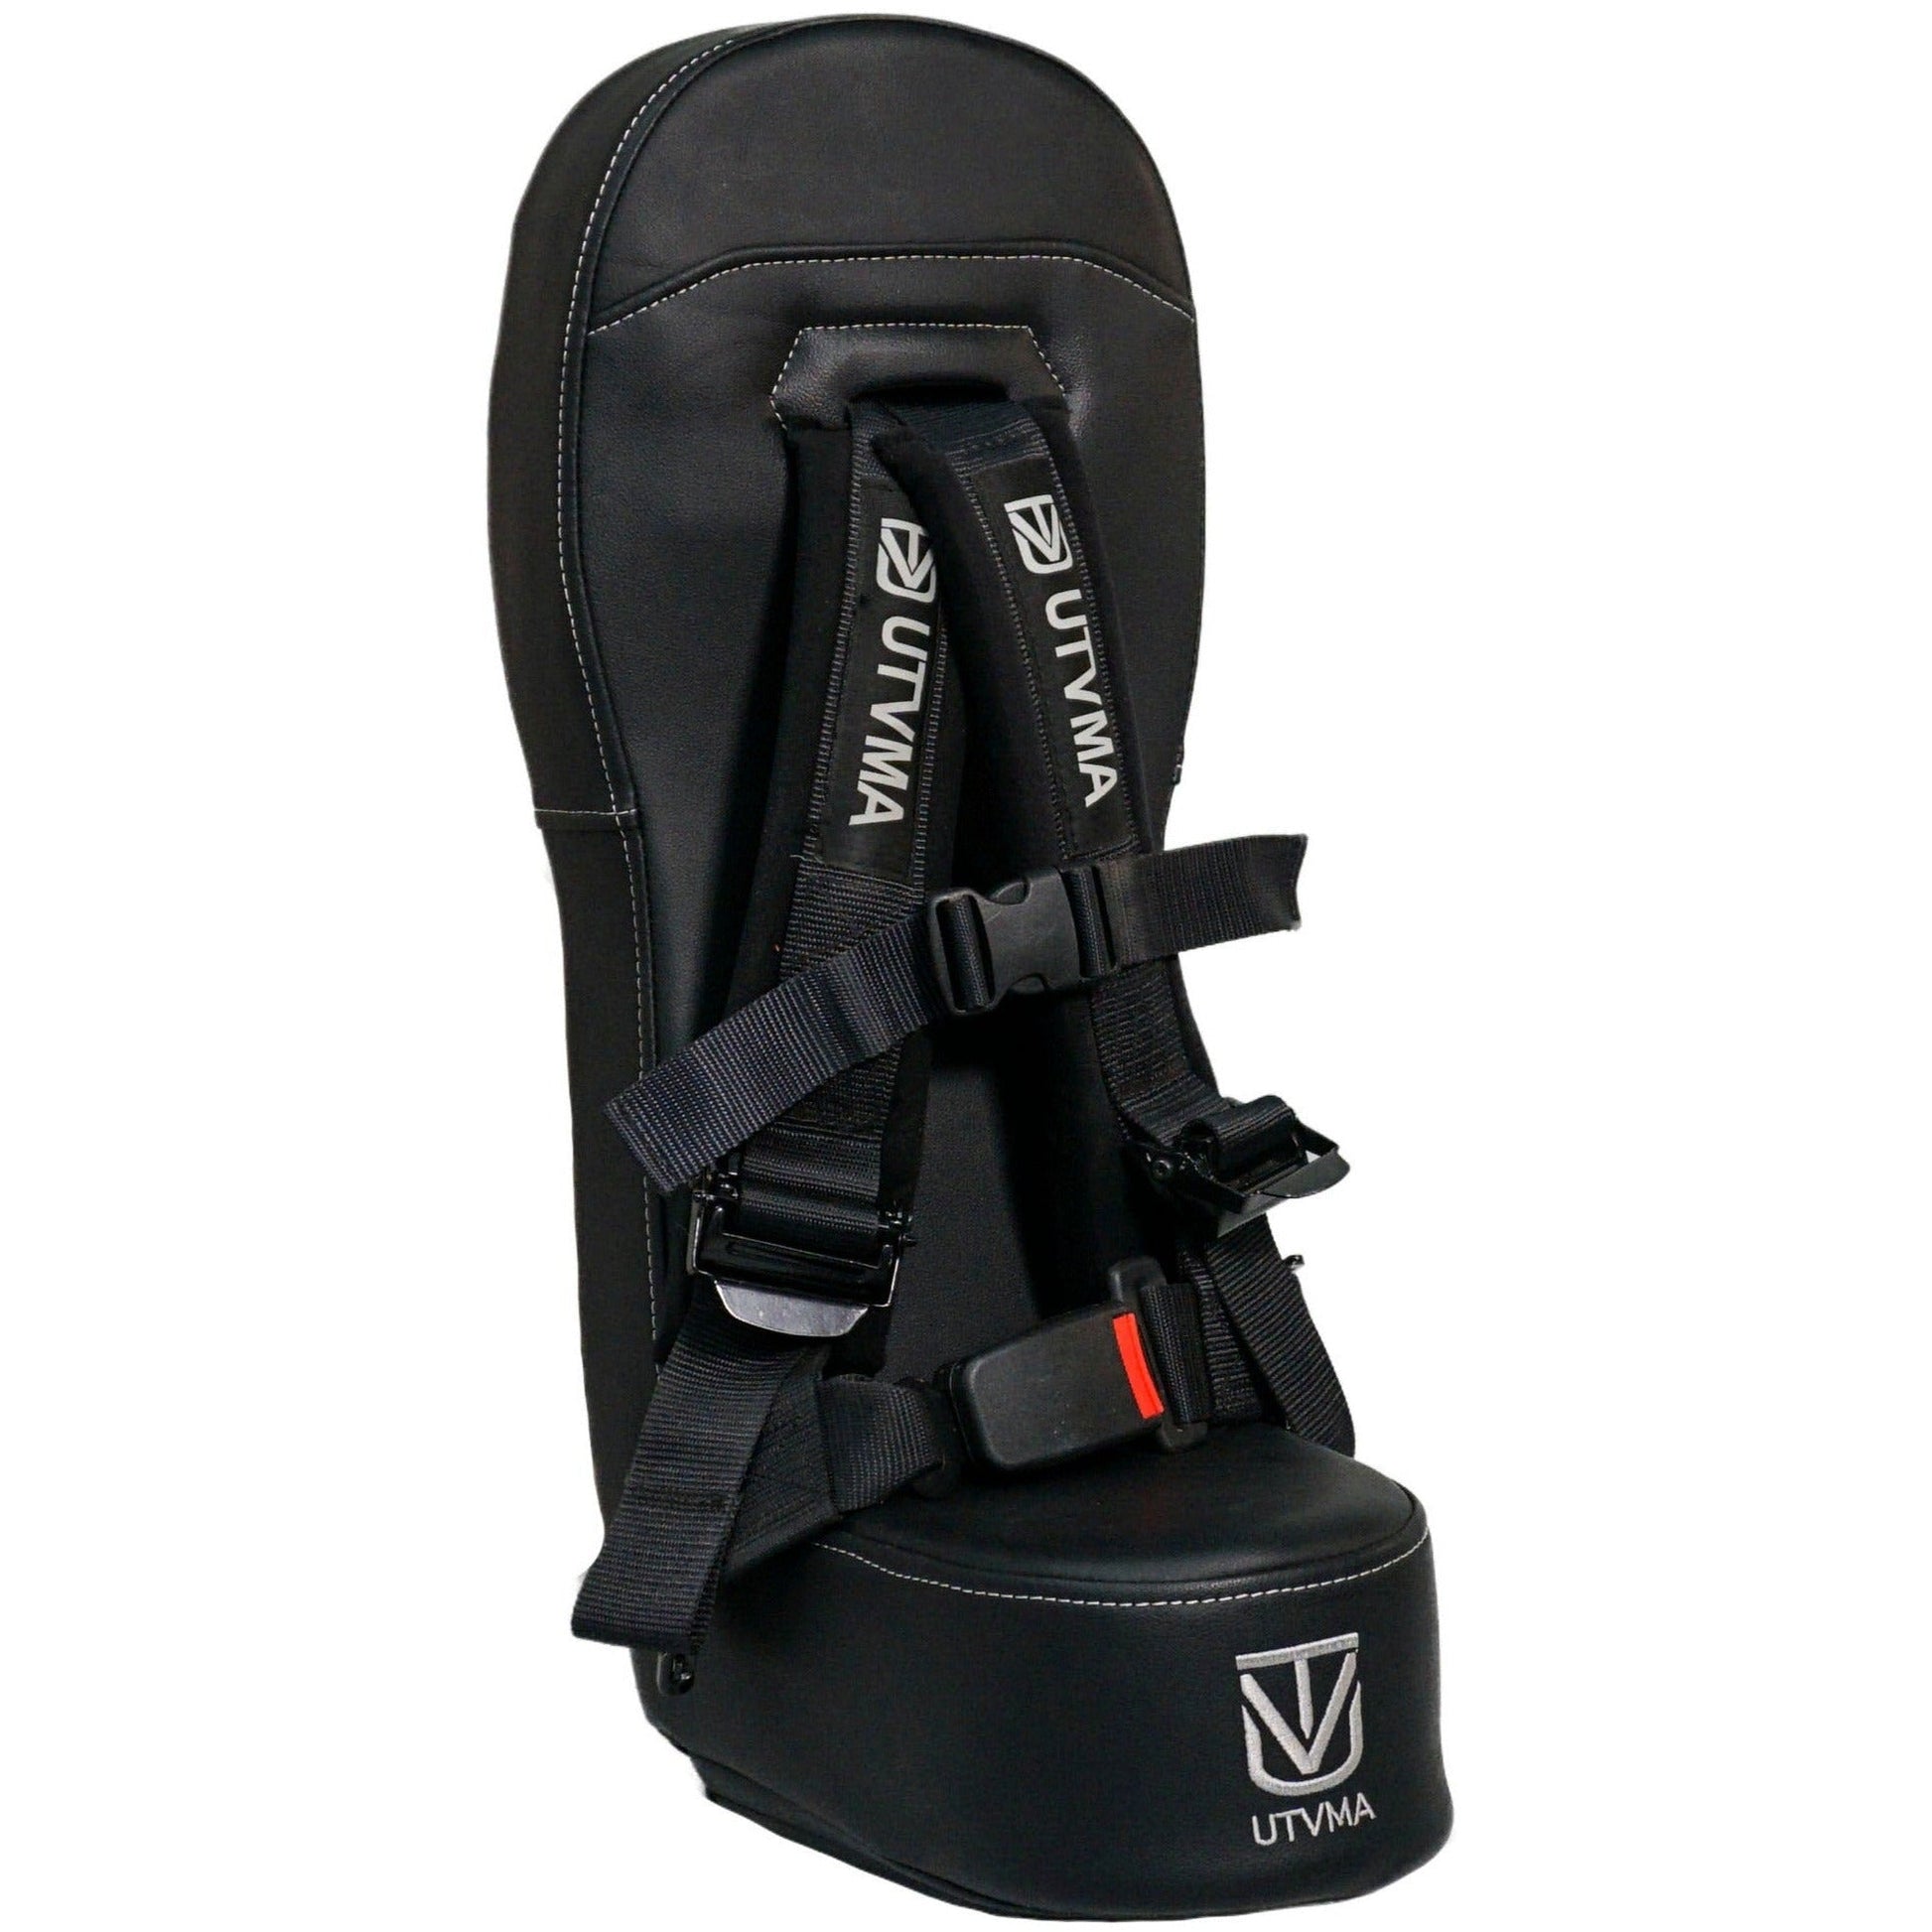 Polaris RZR Pro XP 4 Front Bump Seat with Harness